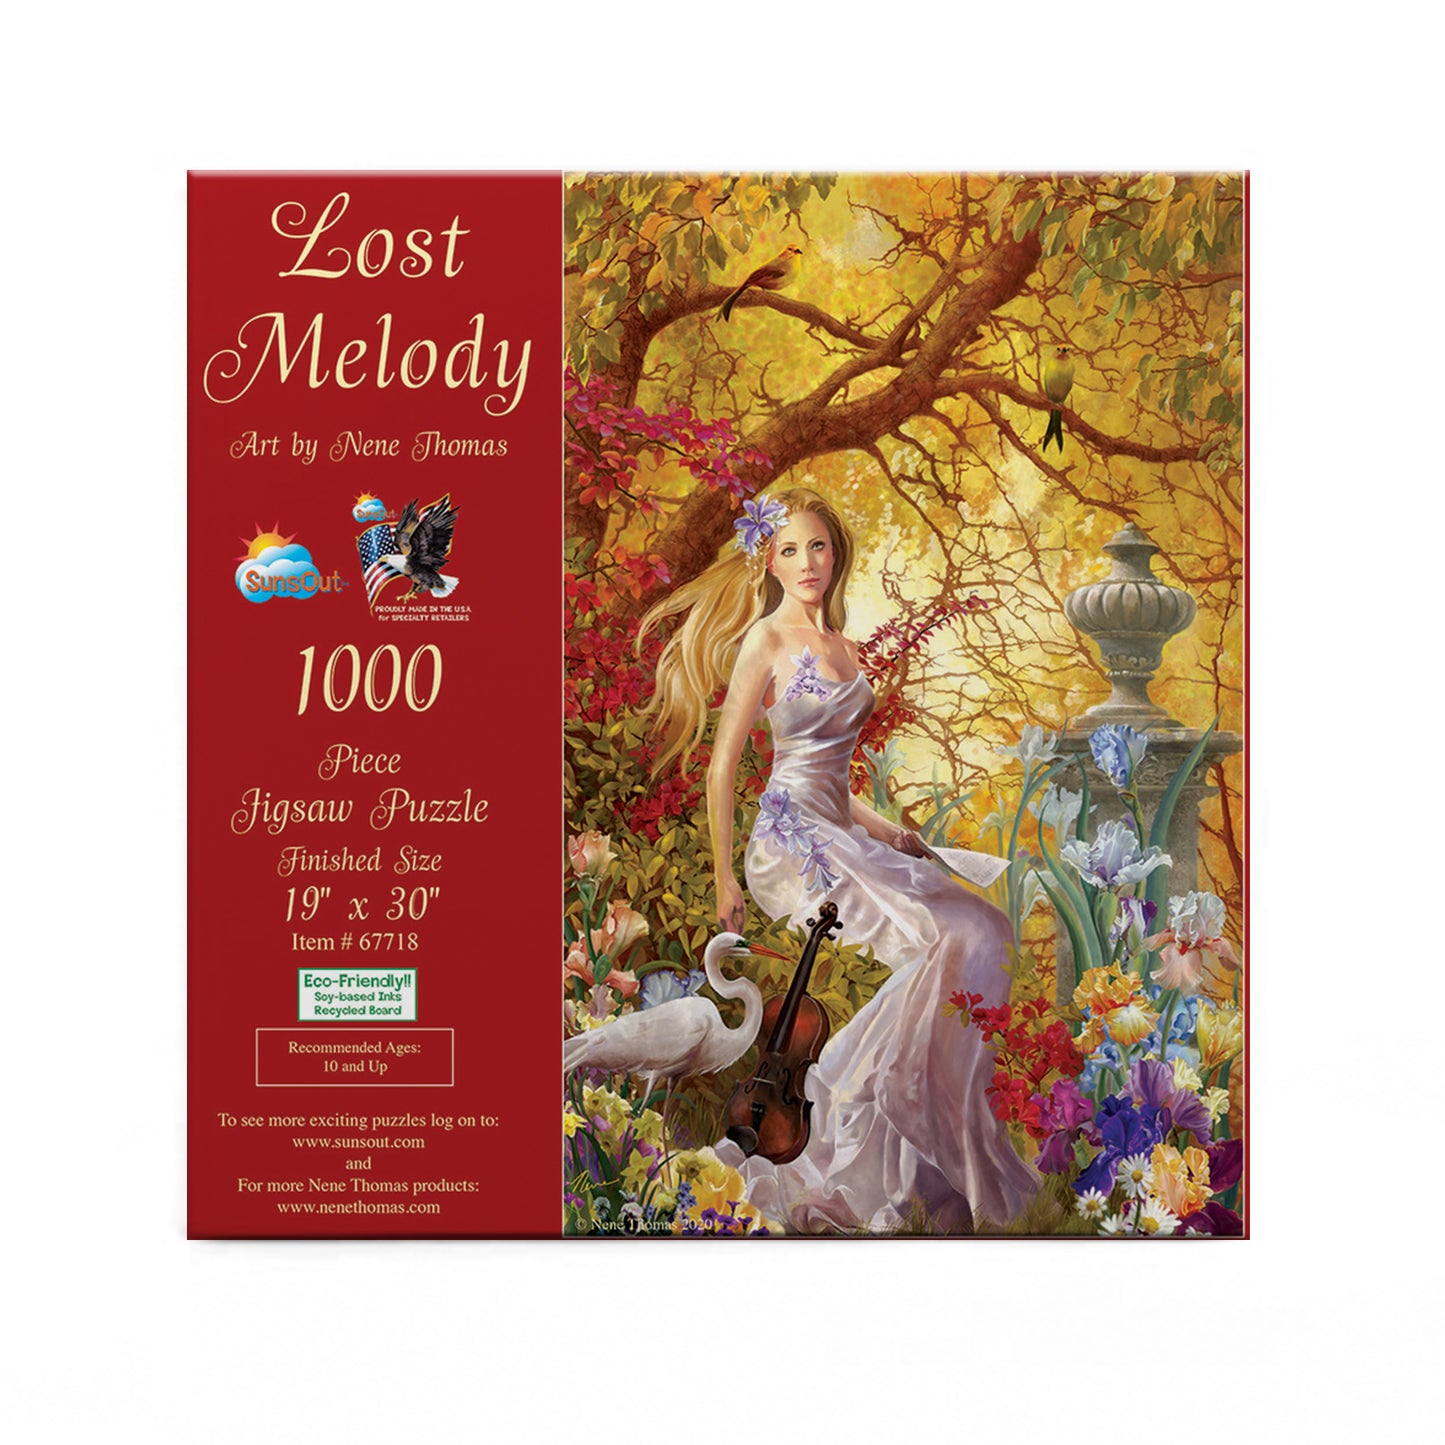 Lost Melody - 1000 Piece Jigsaw Puzzle